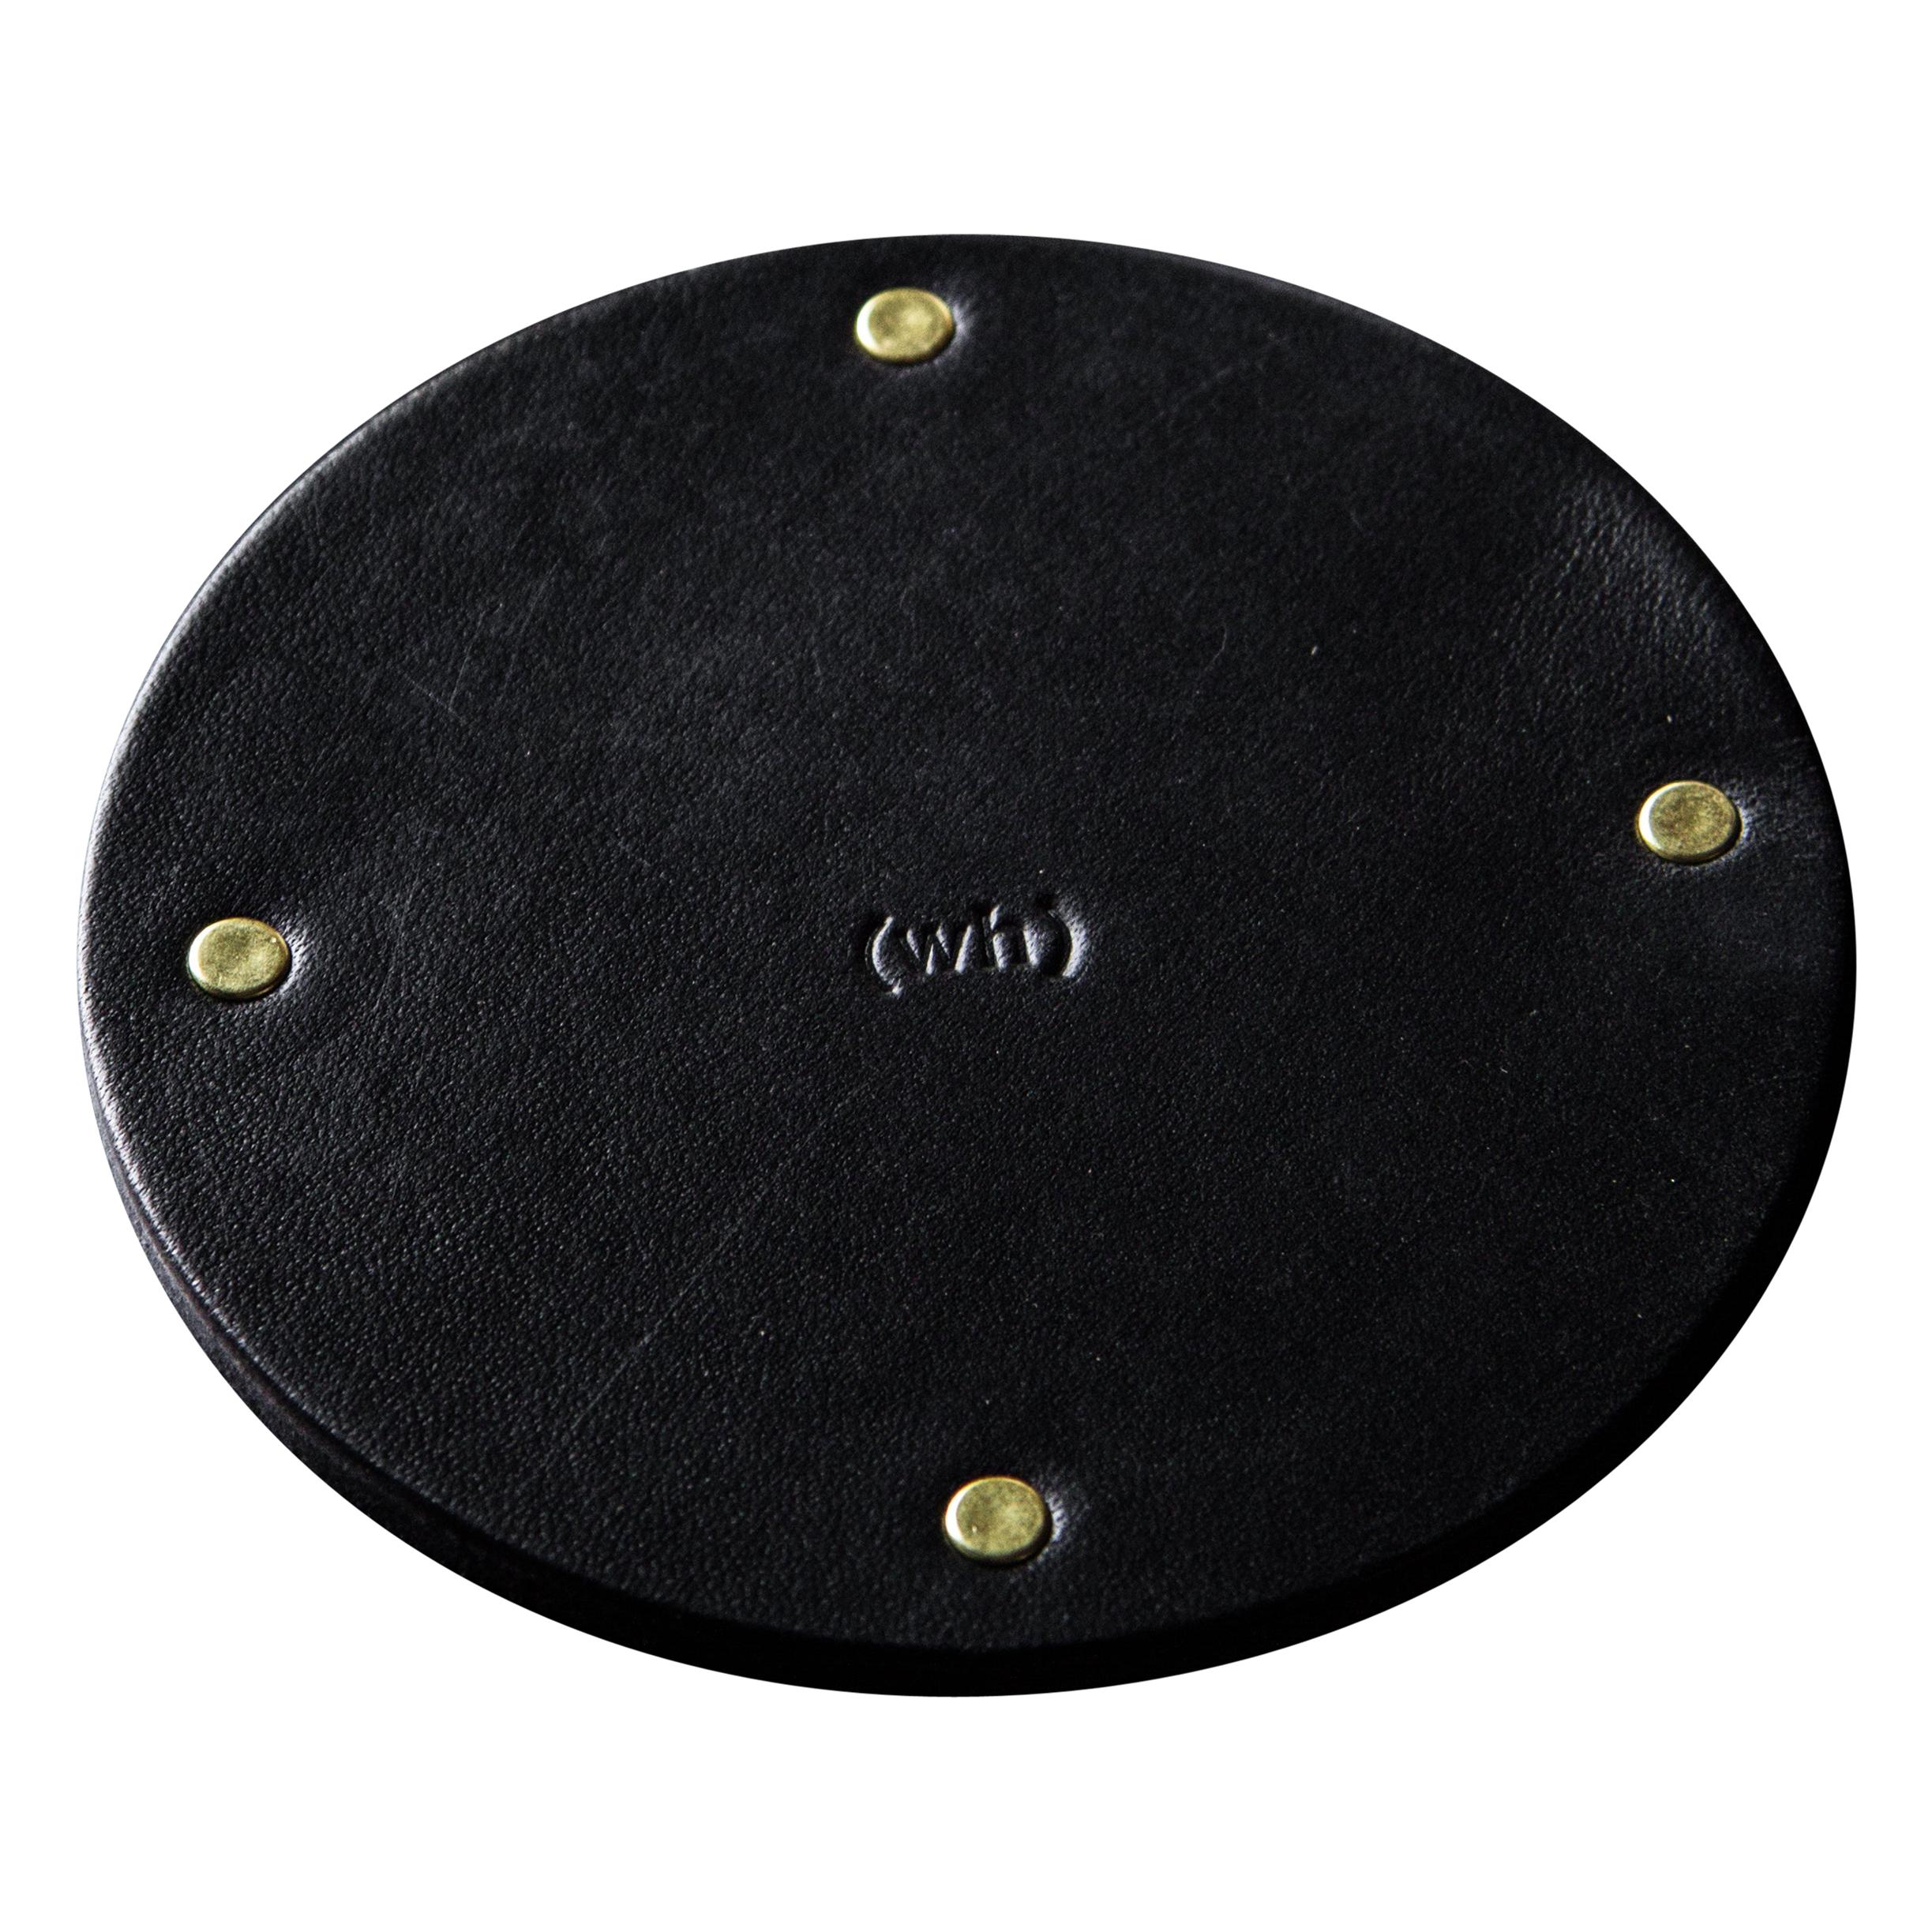 Leather and Brass Coaster Set of 6, Black